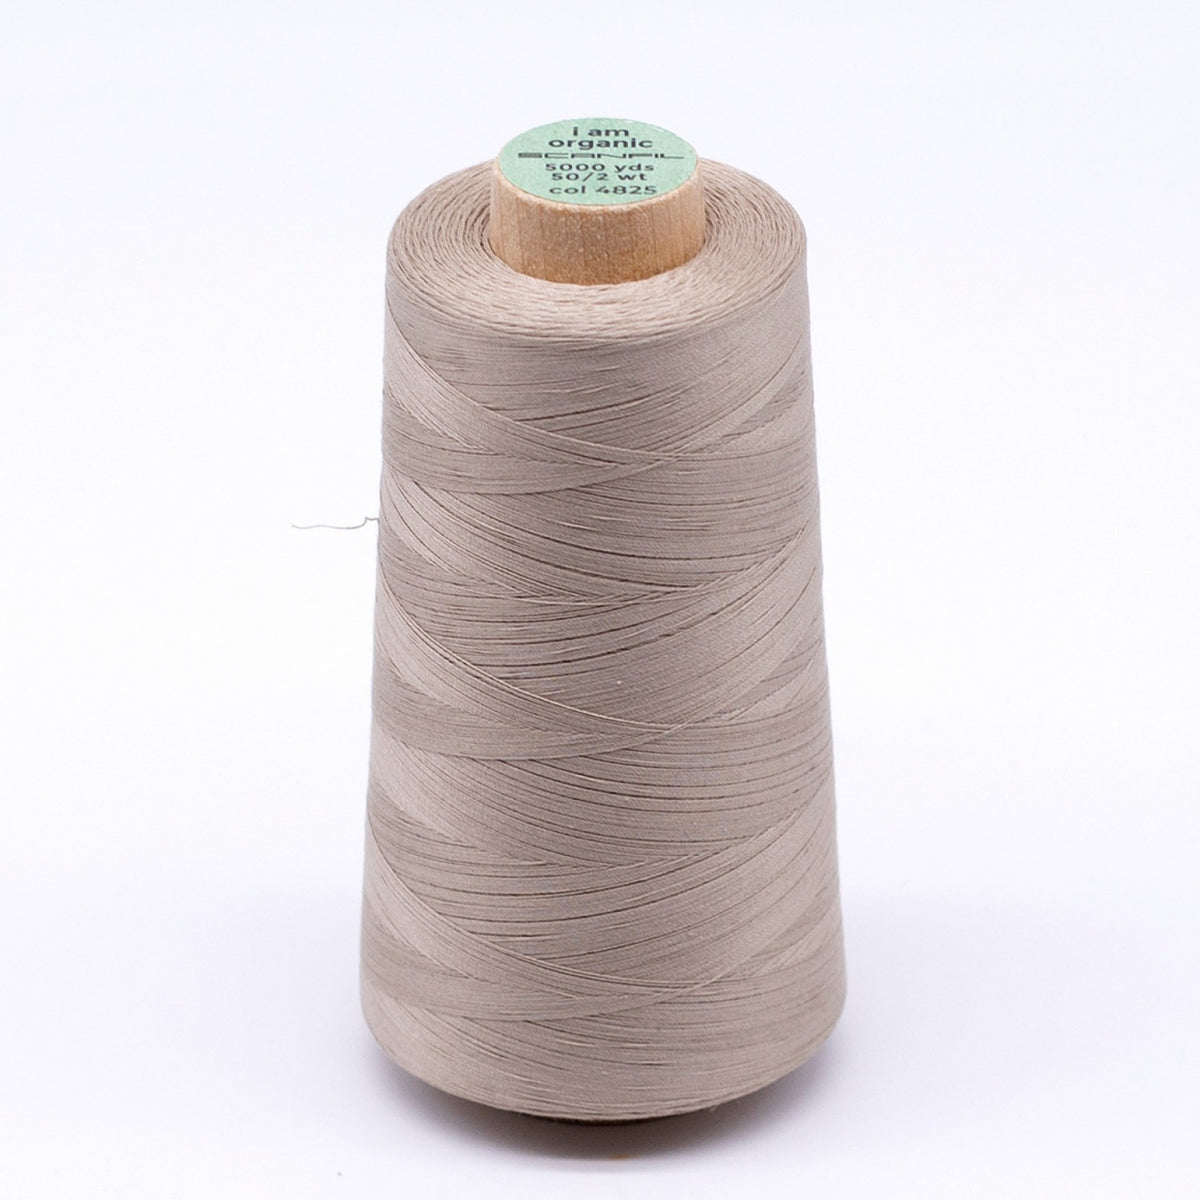 Scanfil CONE Thread 50wt Cotton, 5000 Yards – The Singer Featherweight Shop